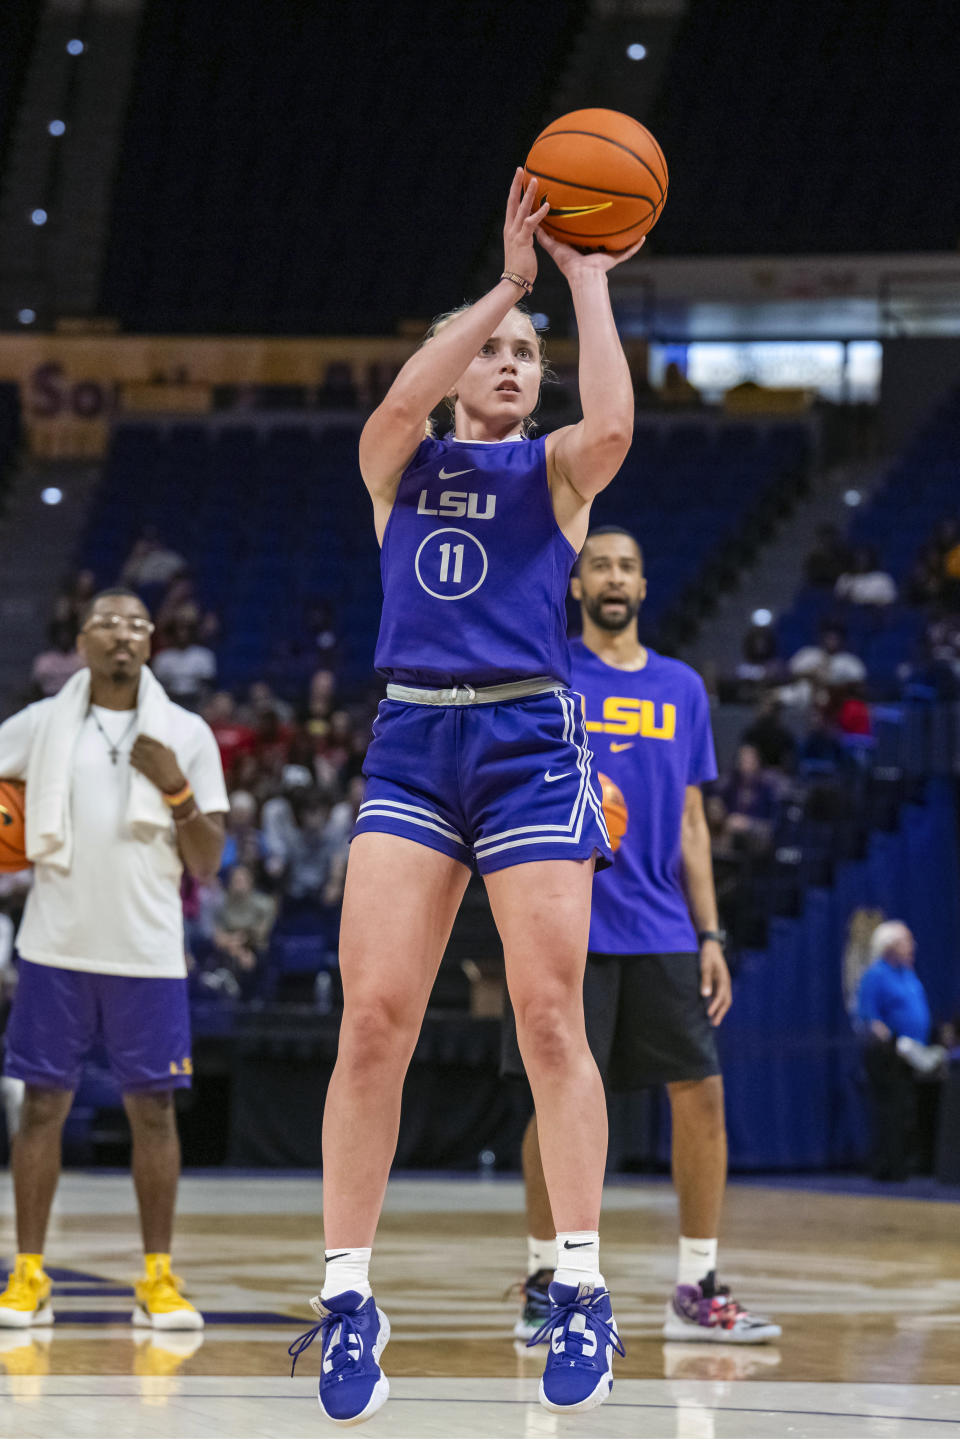 LSU guard Hailey Van Lith (11) takes a jump shot during practice at the Pete Maravich Assembly Center in Baton Rouge, La., Monday, Sept. 25, 2023. LSU is ranked No. 1 in the AP Top 25 preseason women's basketball poll, released Tuesday, Oct. 17, 2023. There's clearly a lot of optimism around LSU as they return a stellar group, including Angel Reese and added two huge transfers with Hailey Van Lith and Aneesah Morrow. (Michael Johnson/The Advocate via AP)